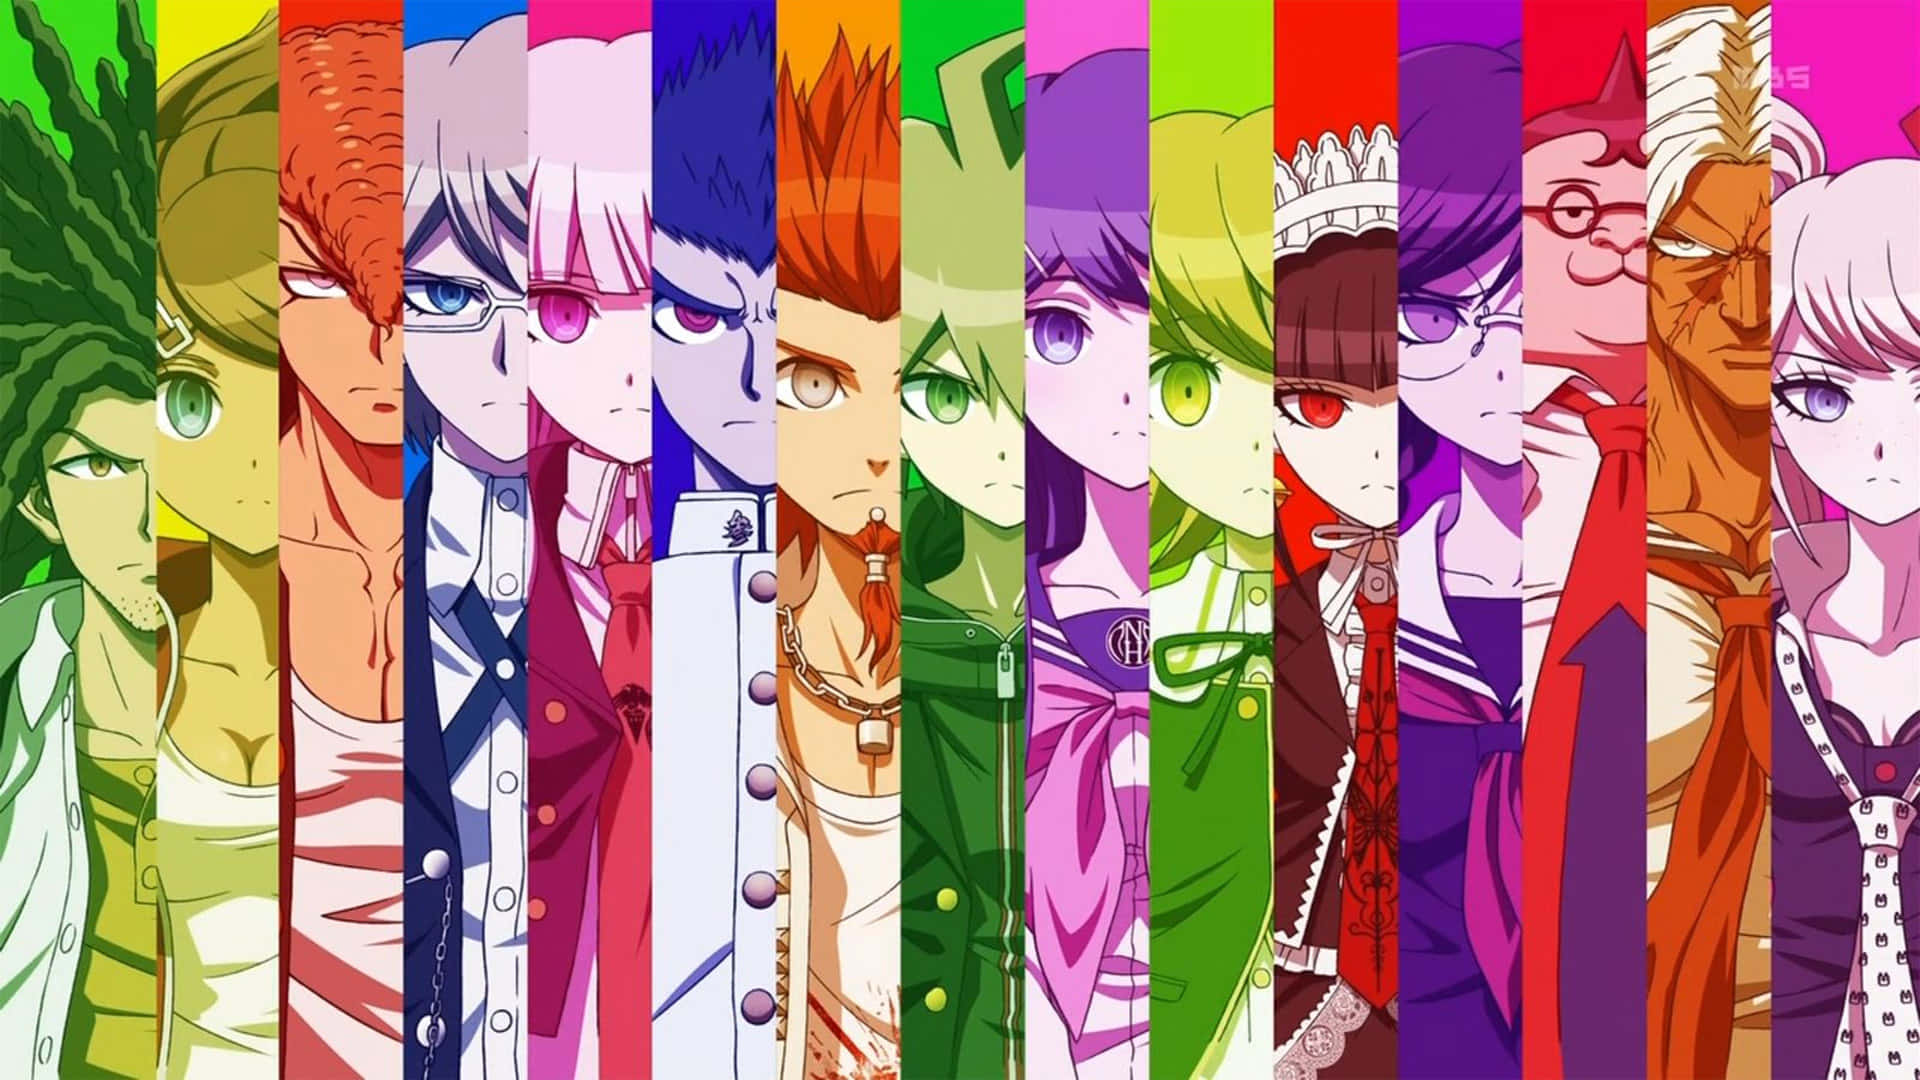 Students at Hope's Peak Academy investigate the mysteries of Danganronpa